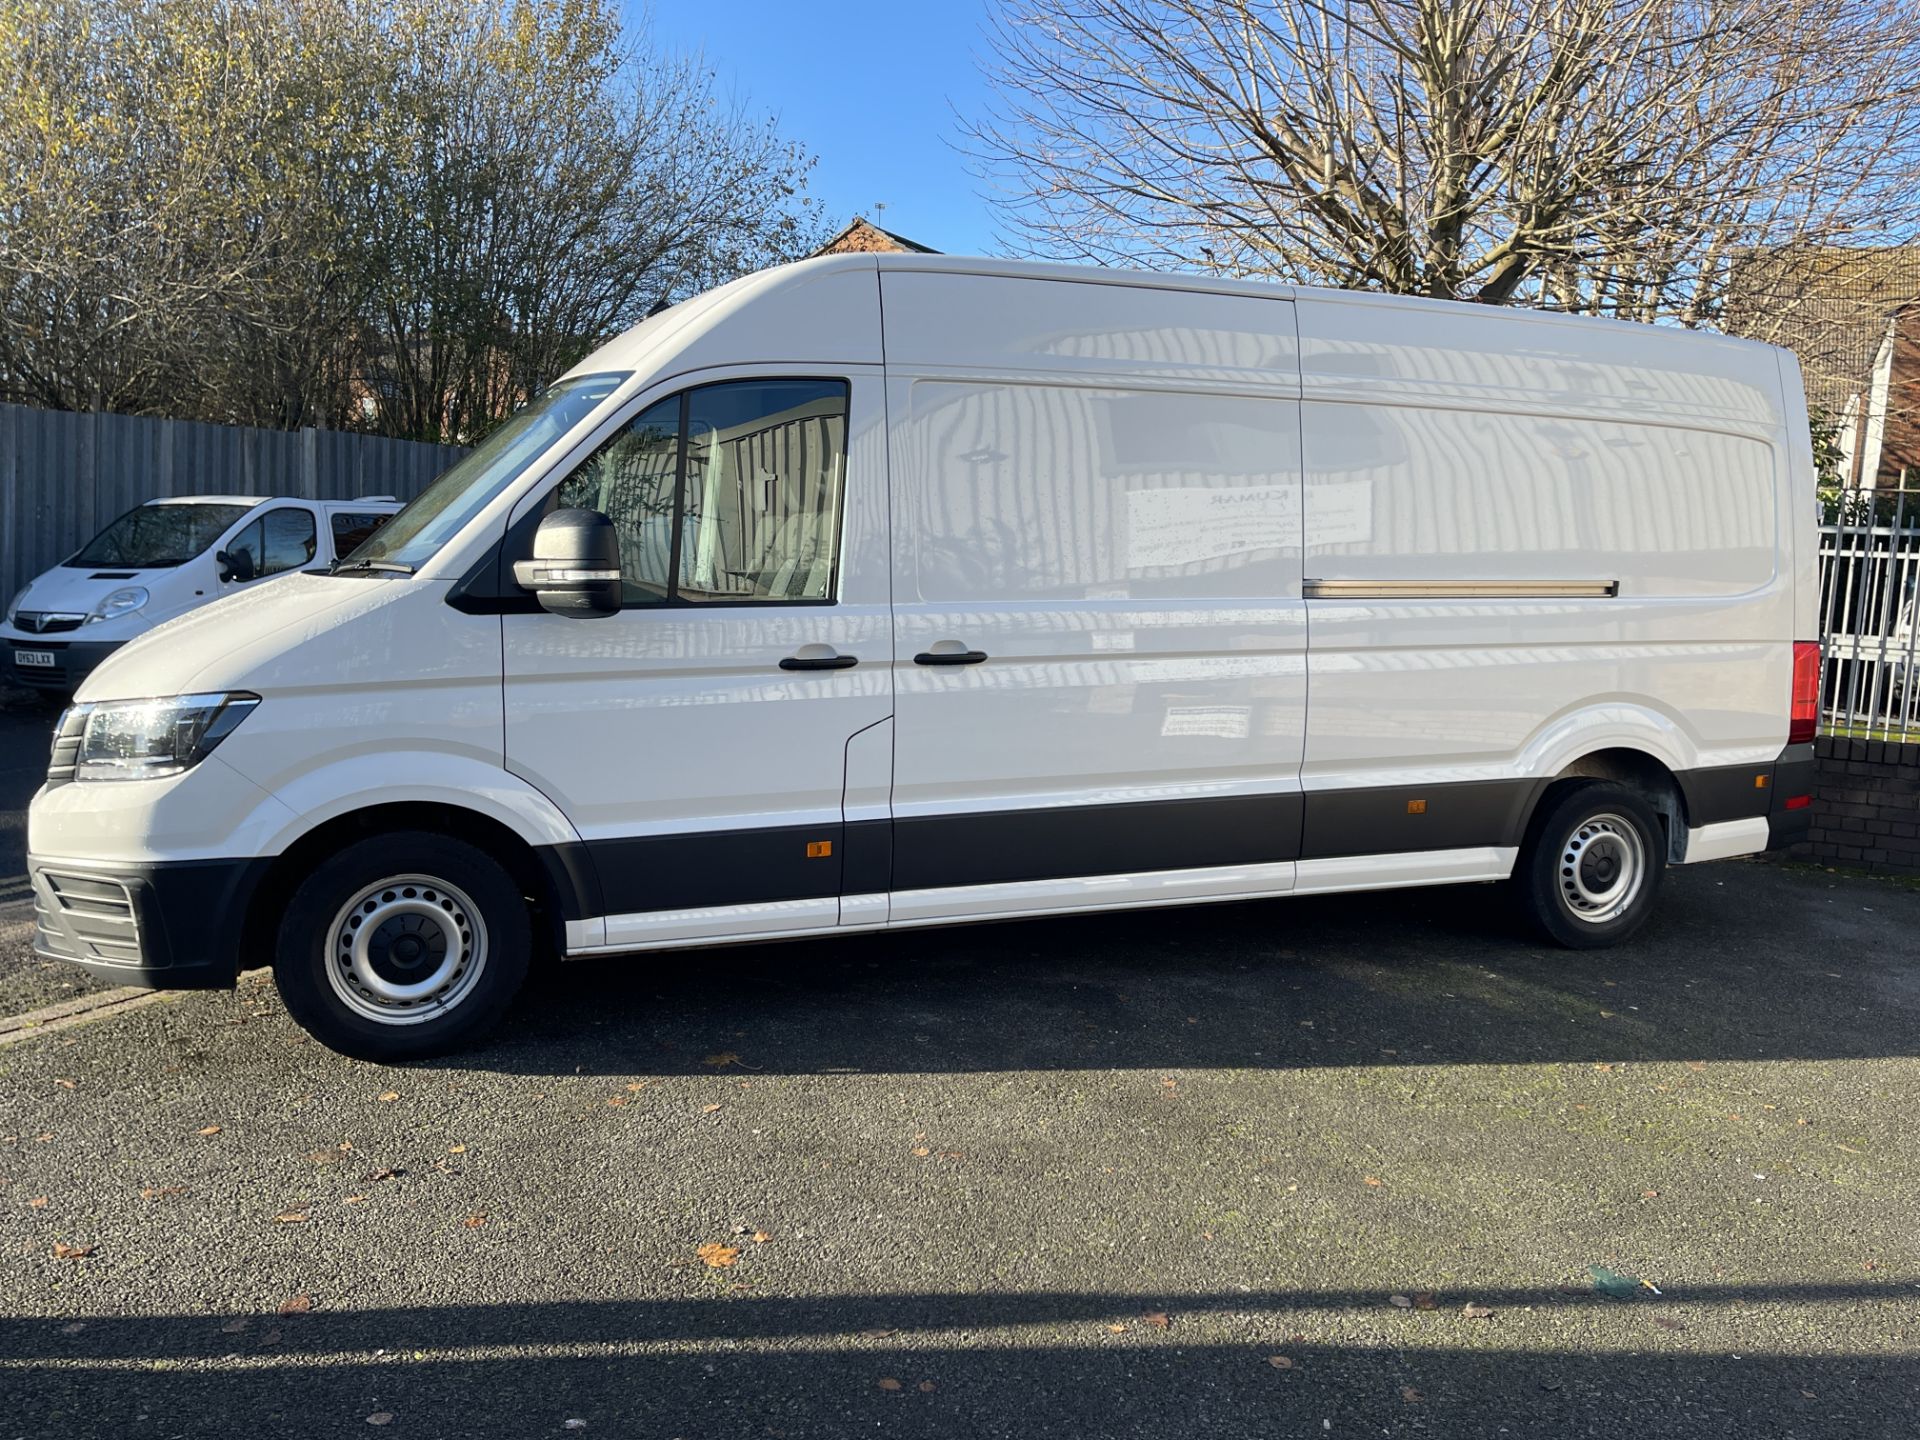 2018 - VW Crafter CR35 102PS Trend Line LWB TDI - Image 14 of 34